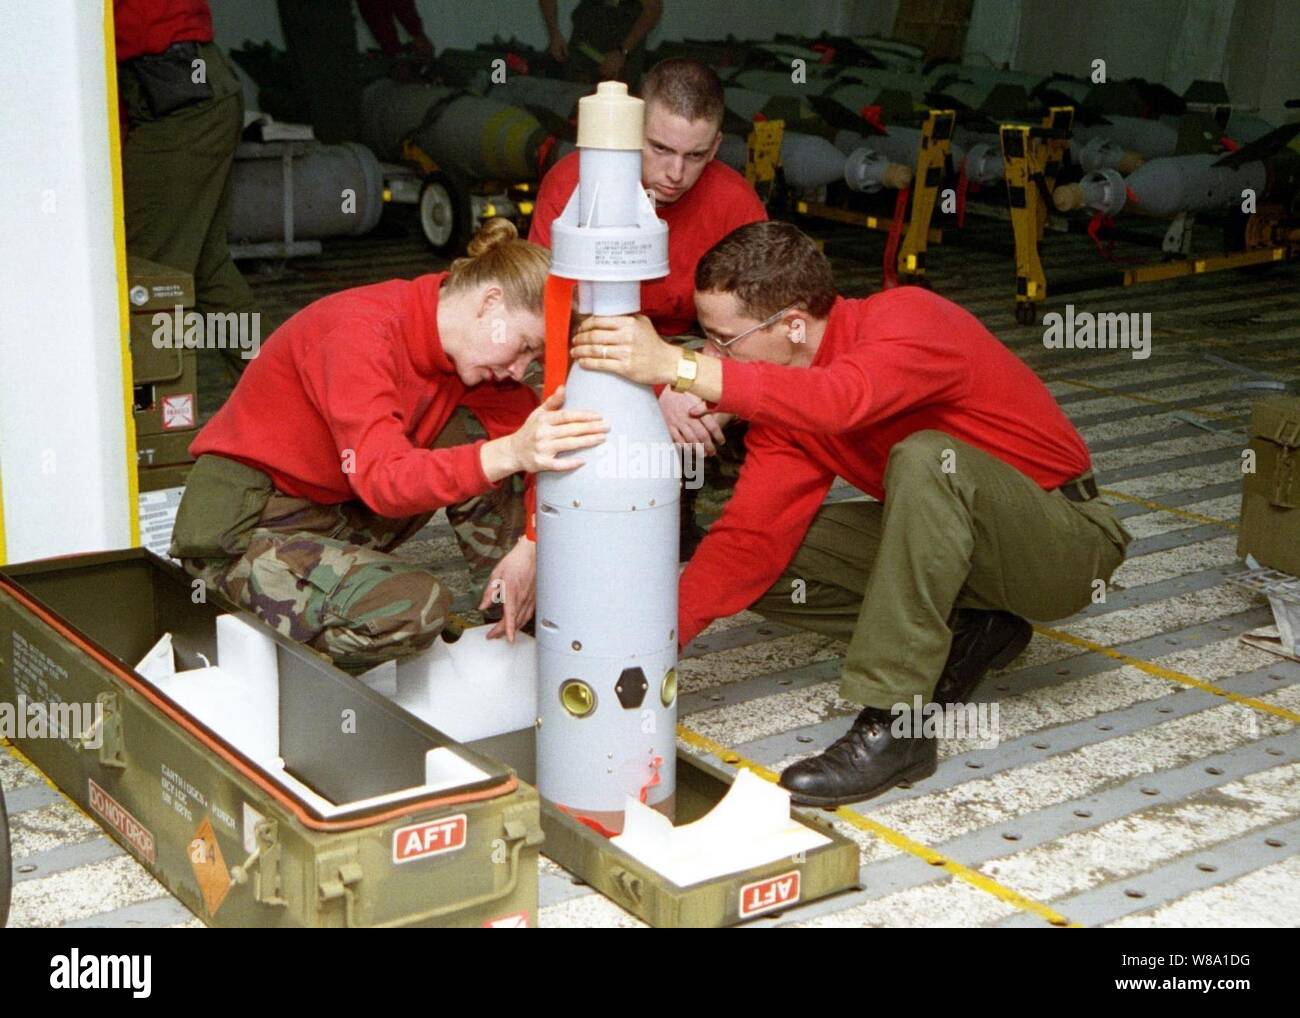 Petty Officer 2nd Class Kathy Higingbotham (left) Airman Apprentice Jon Mitchell (center) and Aviation Ordnanceman Thomas Moore (right) inspect the guidance system assembly on a laser guided GBU-16 bomb on board the aircraft carrier USS Nimitz (CVN 68) on Nov. 10, 1997.  The USS Nimitz (CVN 68) battle group is operating in the Persian Gulf in support of the U.S. and coalition enforcement of the no-fly-zone over Southern Iraq. All three are aviation ordnancemen assigned to the weapons department aboard the USS Nimitz. Higingbotham is from Addy, Wash.;  Mitchell is from Lakeland, Fla.; and Moore Stock Photo